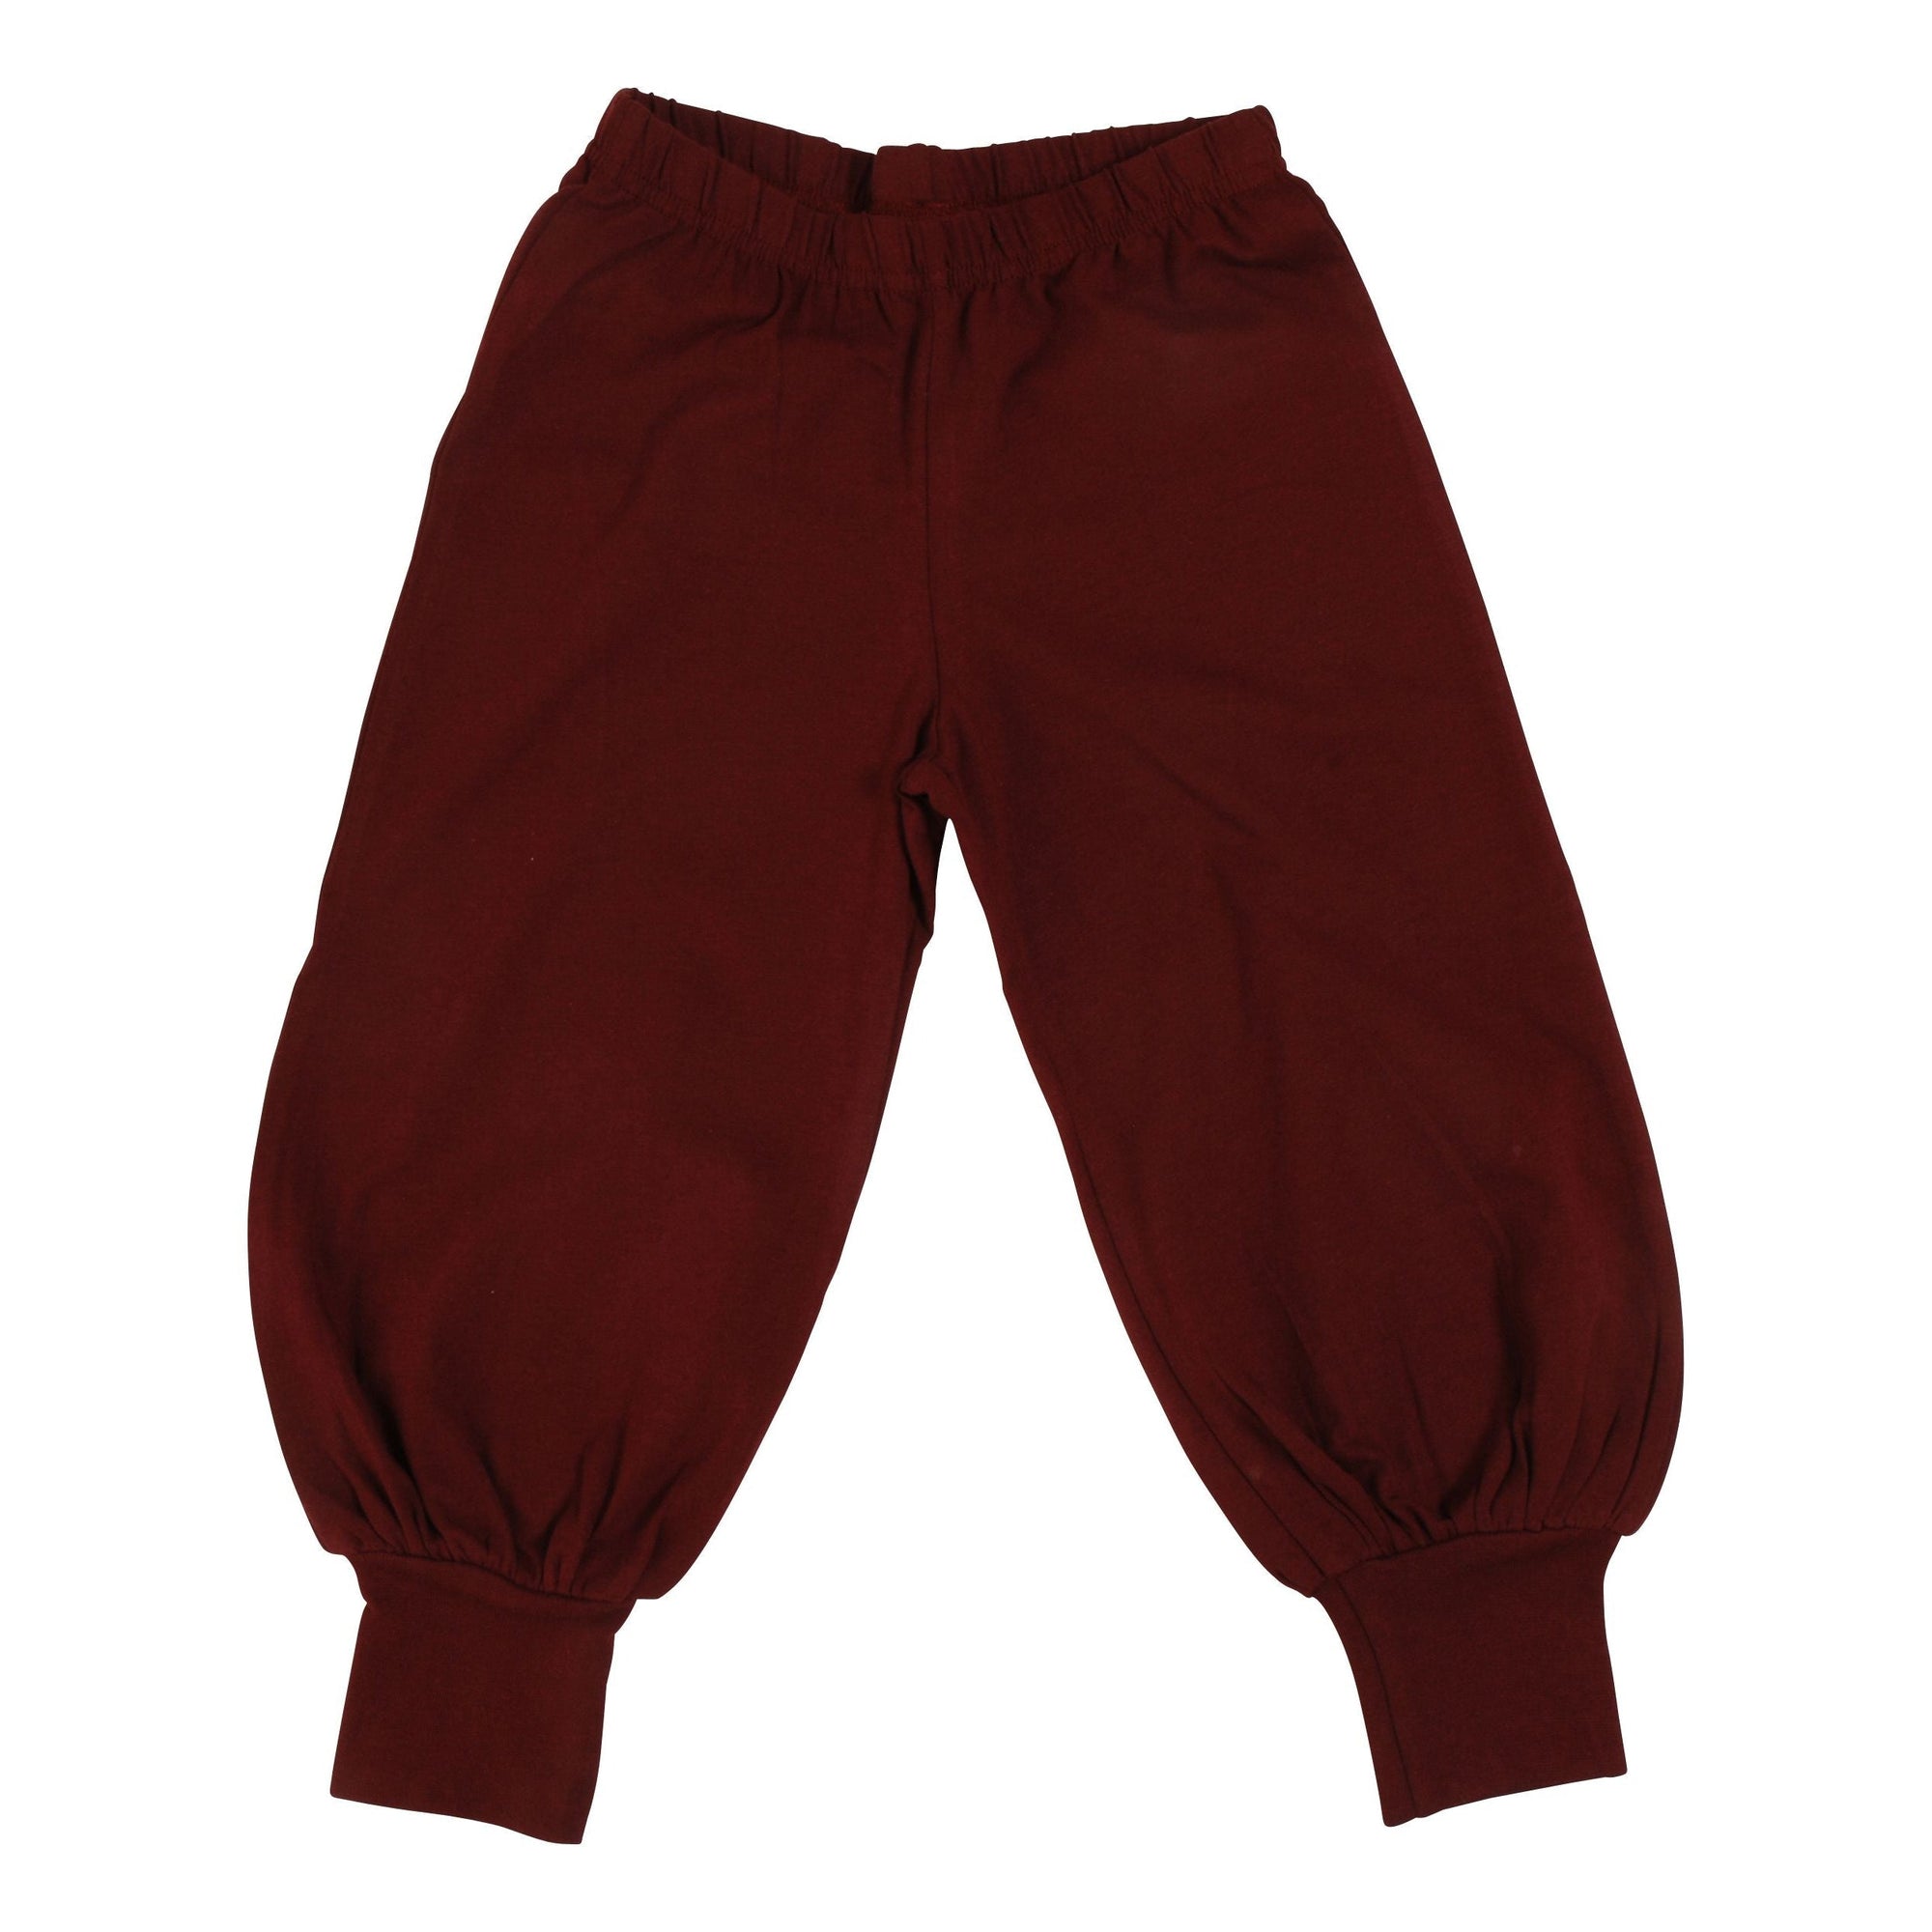 Madder Brown Baggy Pants - 1 Left Size 12-14 years-More Than A Fling-Modern Rascals